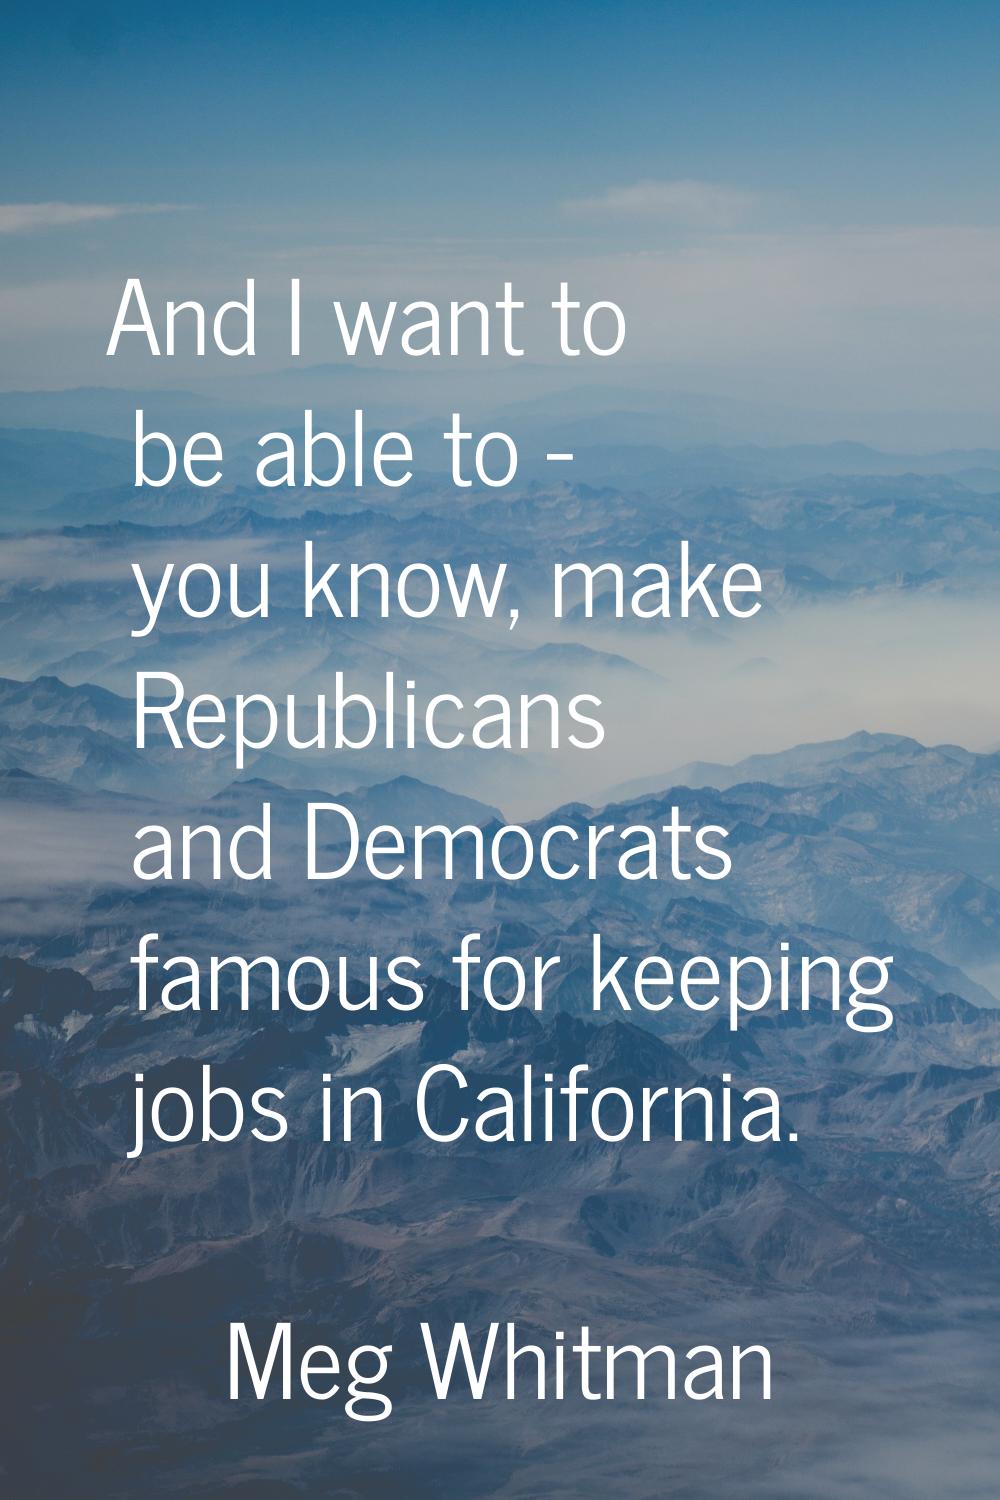 And I want to be able to - you know, make Republicans and Democrats famous for keeping jobs in Cali